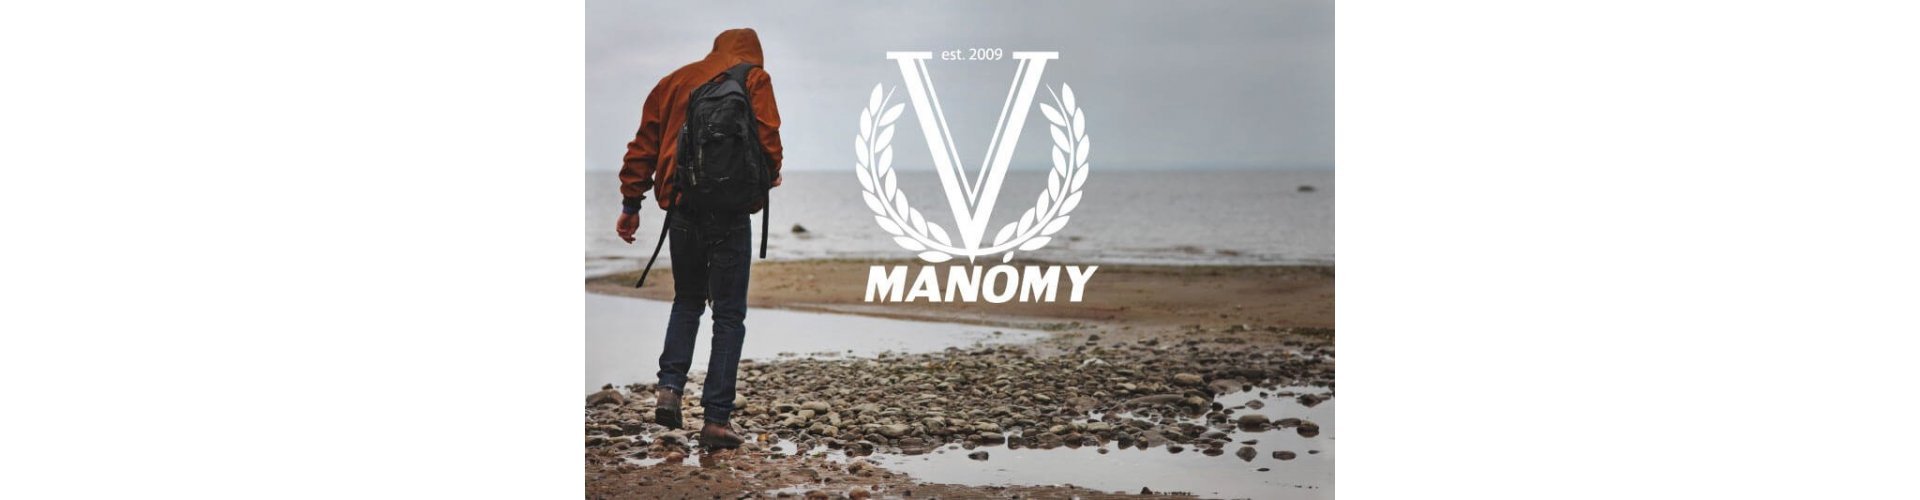 Launch of AFOUR Hiker winter boots for the fifth anniversary of MANOMY store